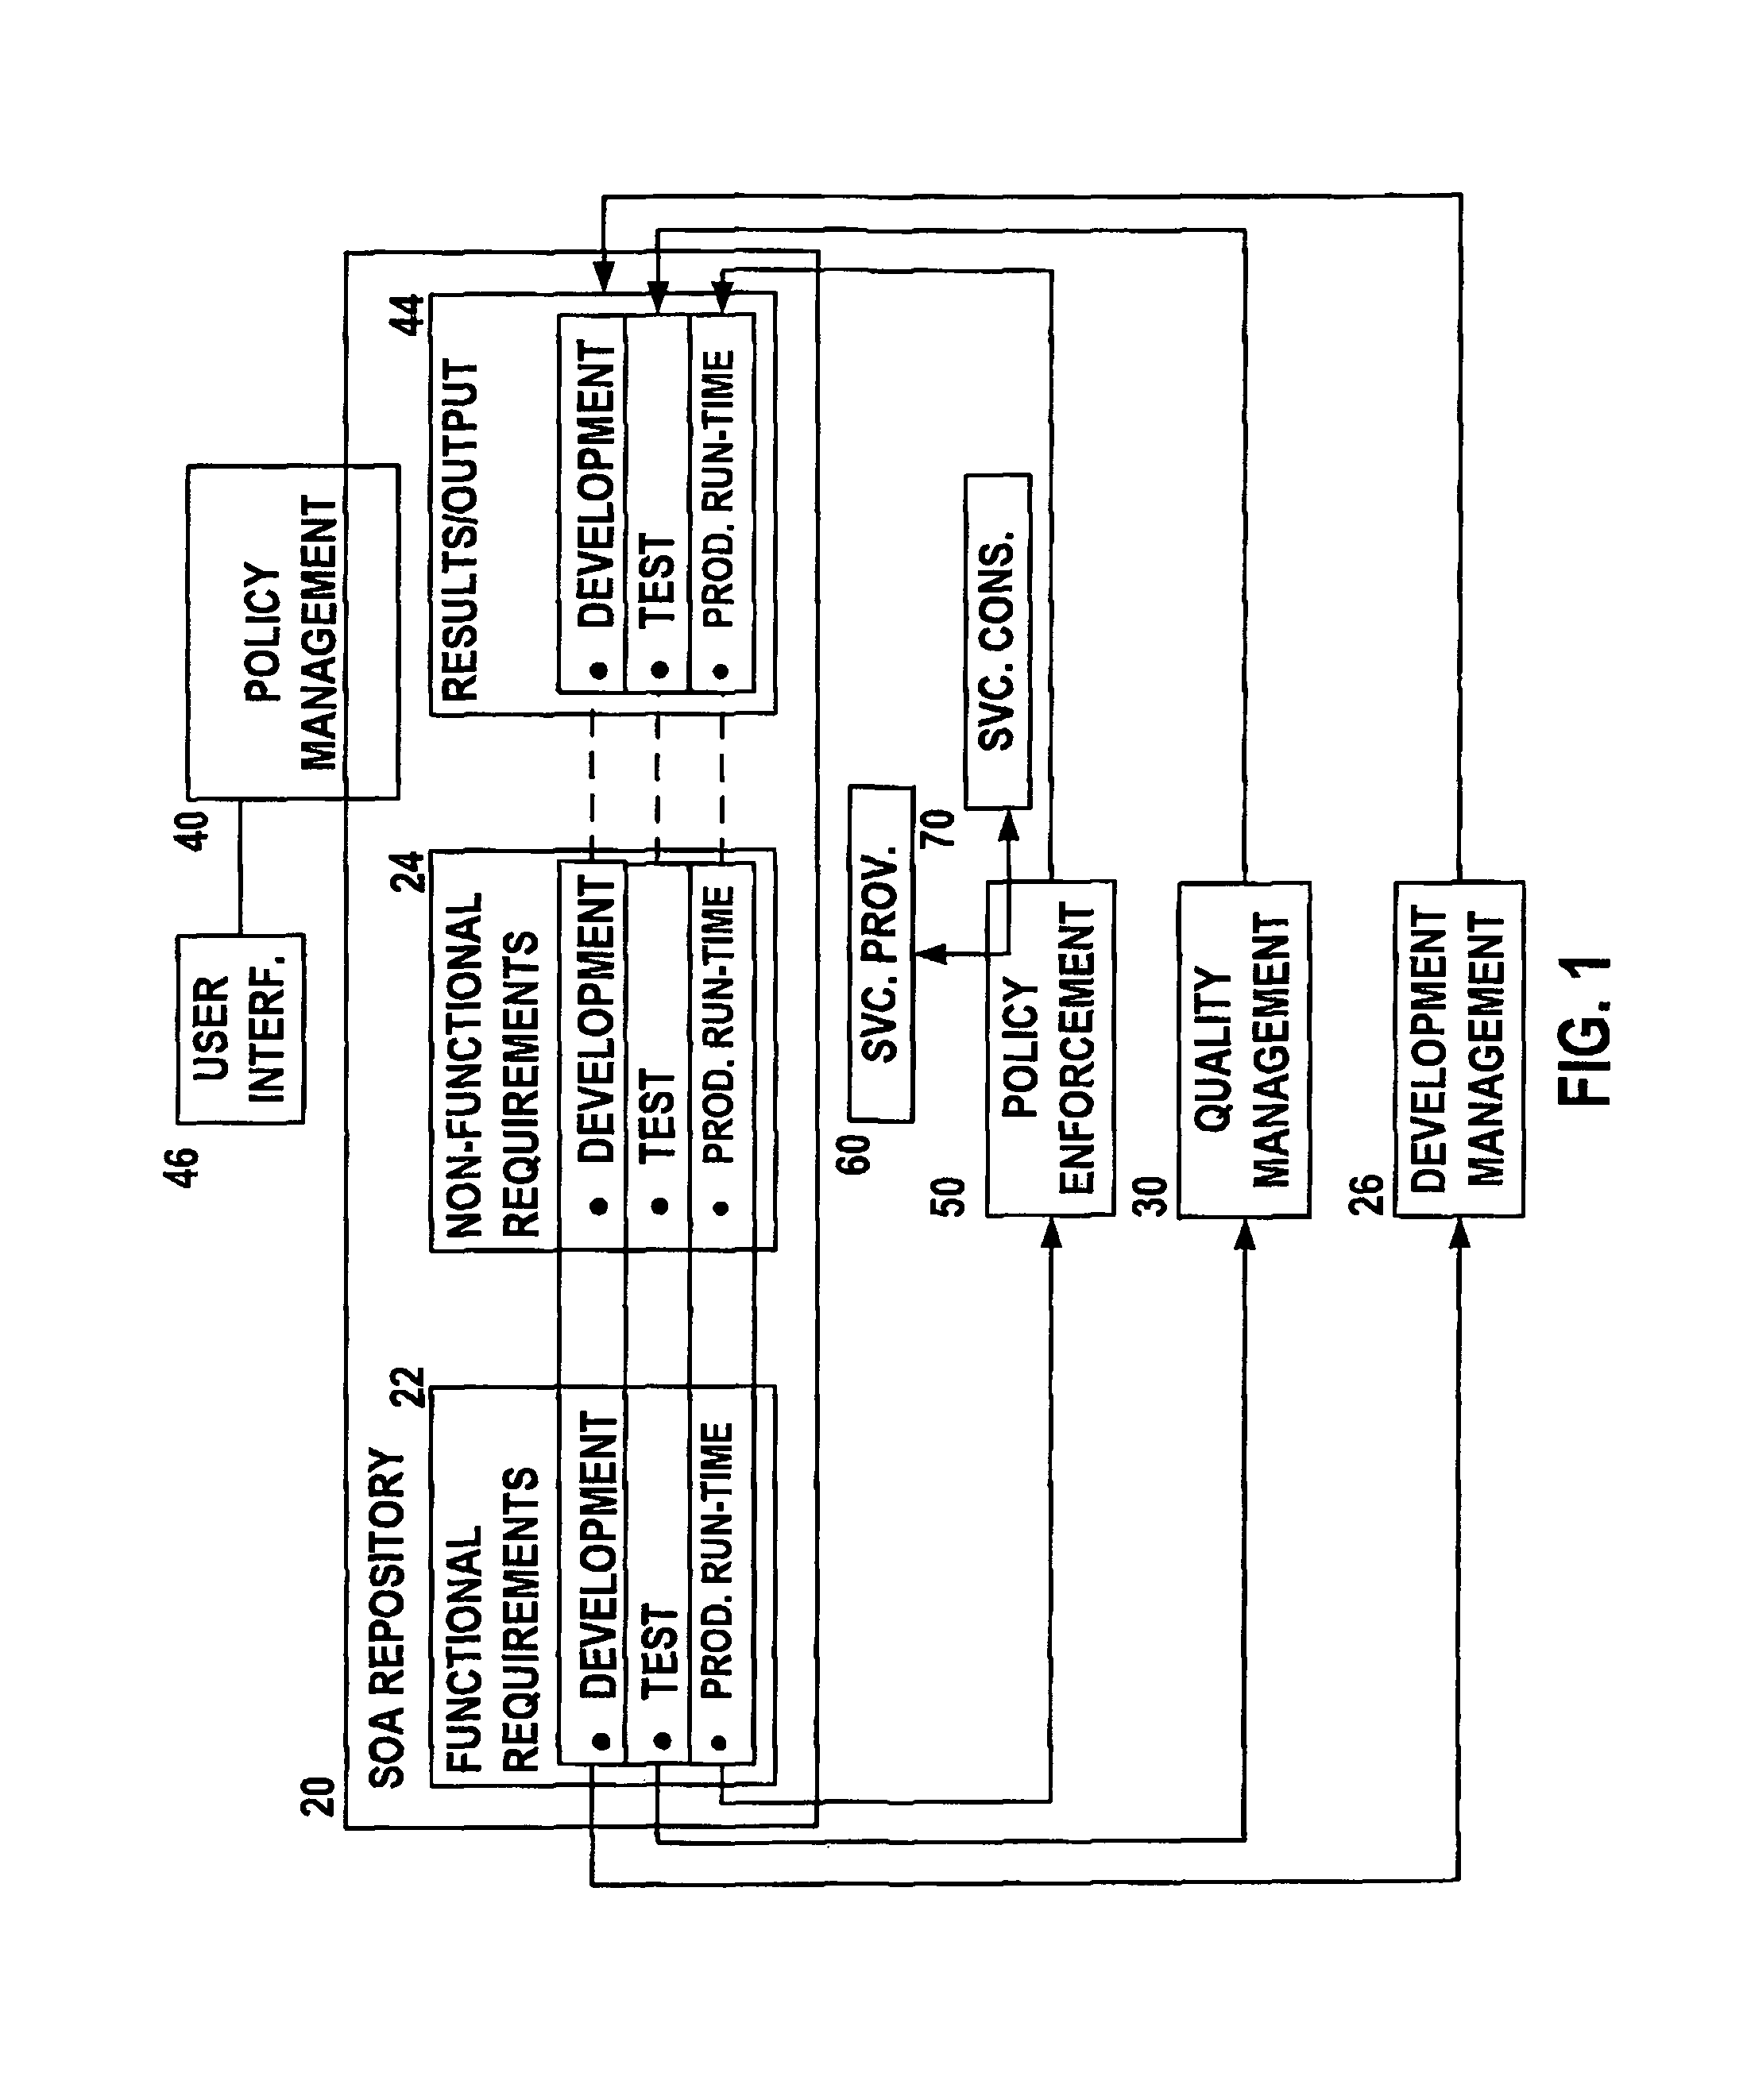 Integrated SOA deployment and management system and method for software services